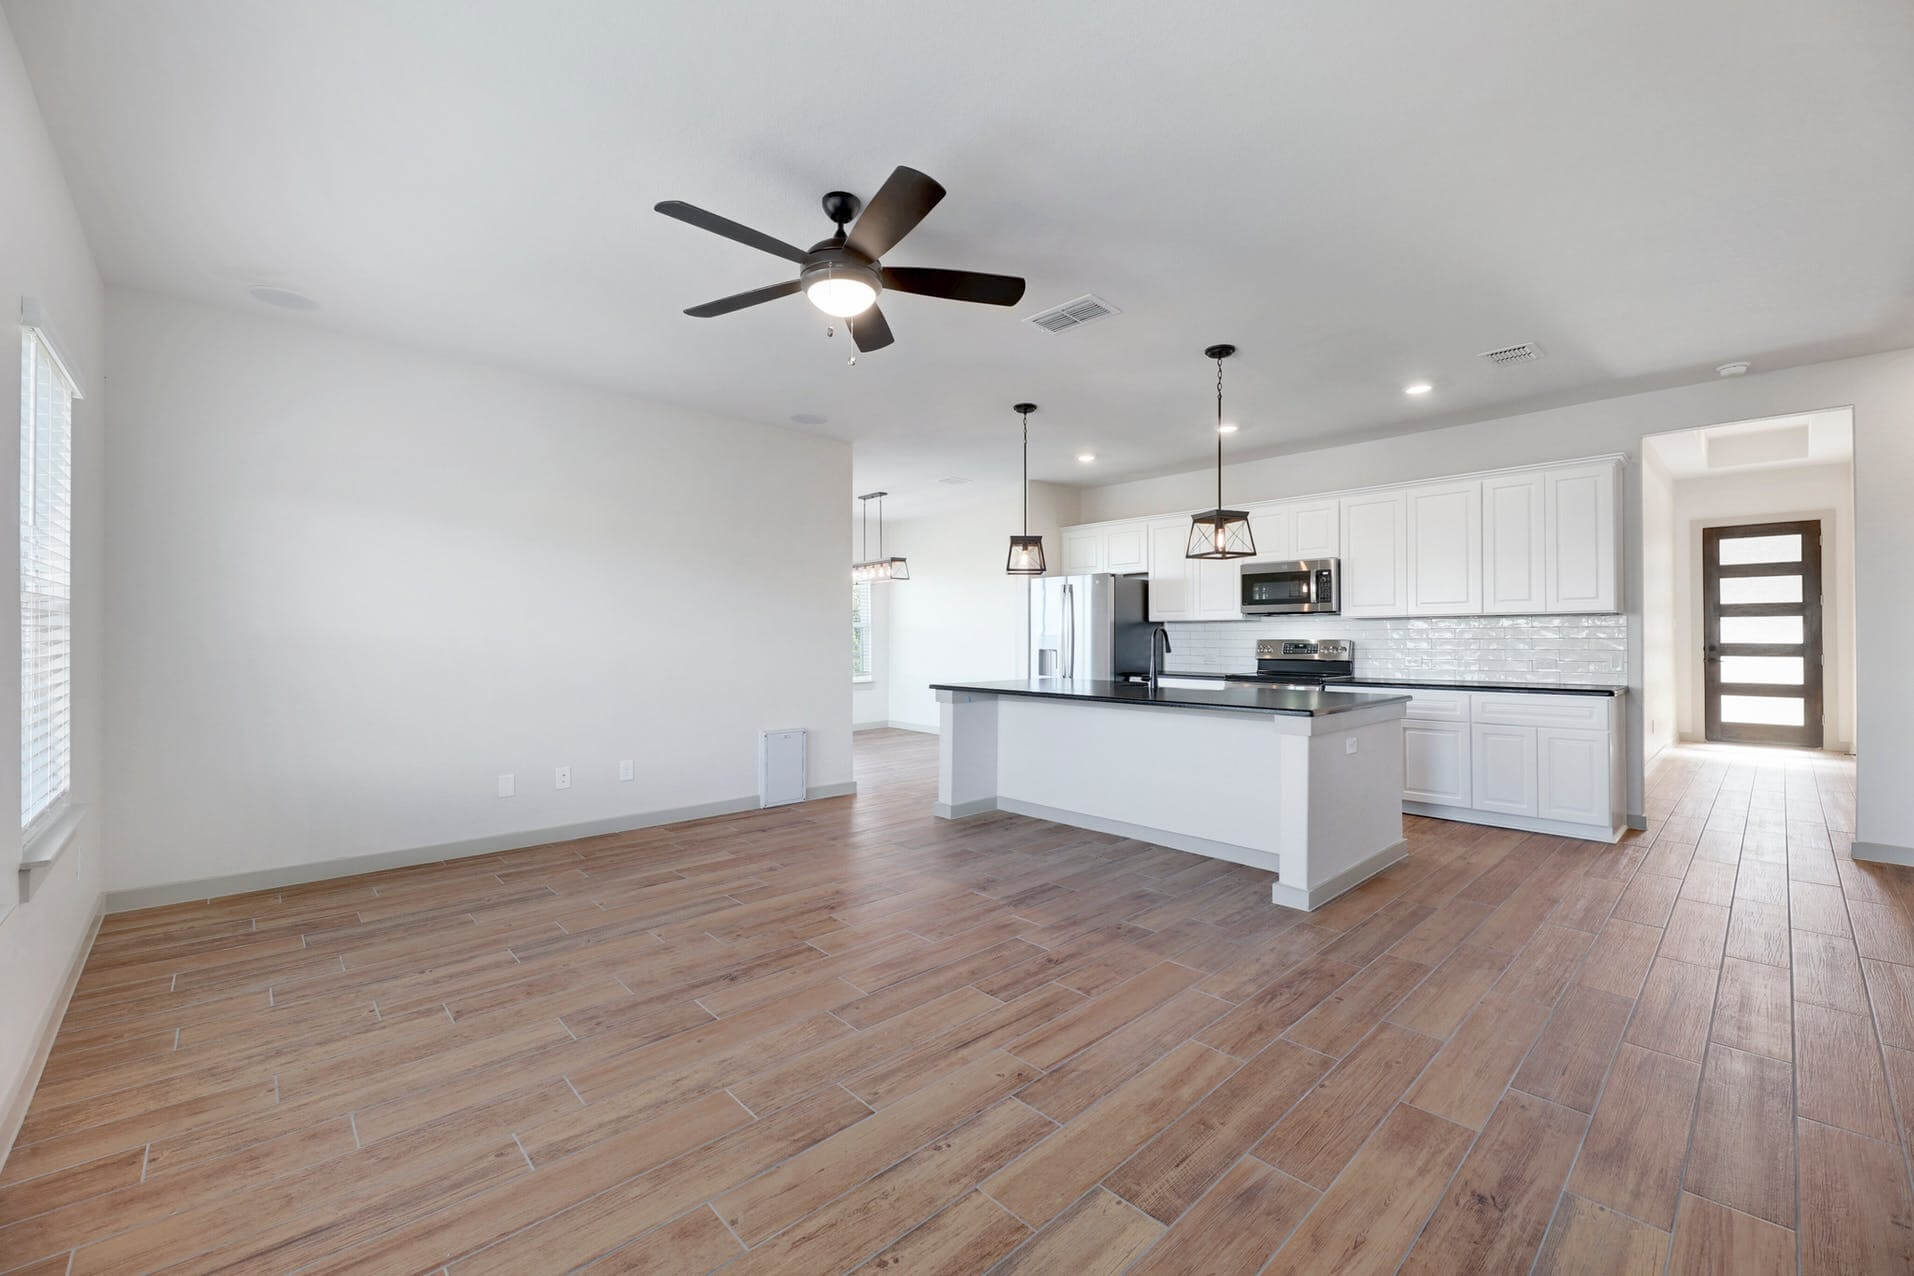 An empty kitchen with wood floors and a ceiling fan.